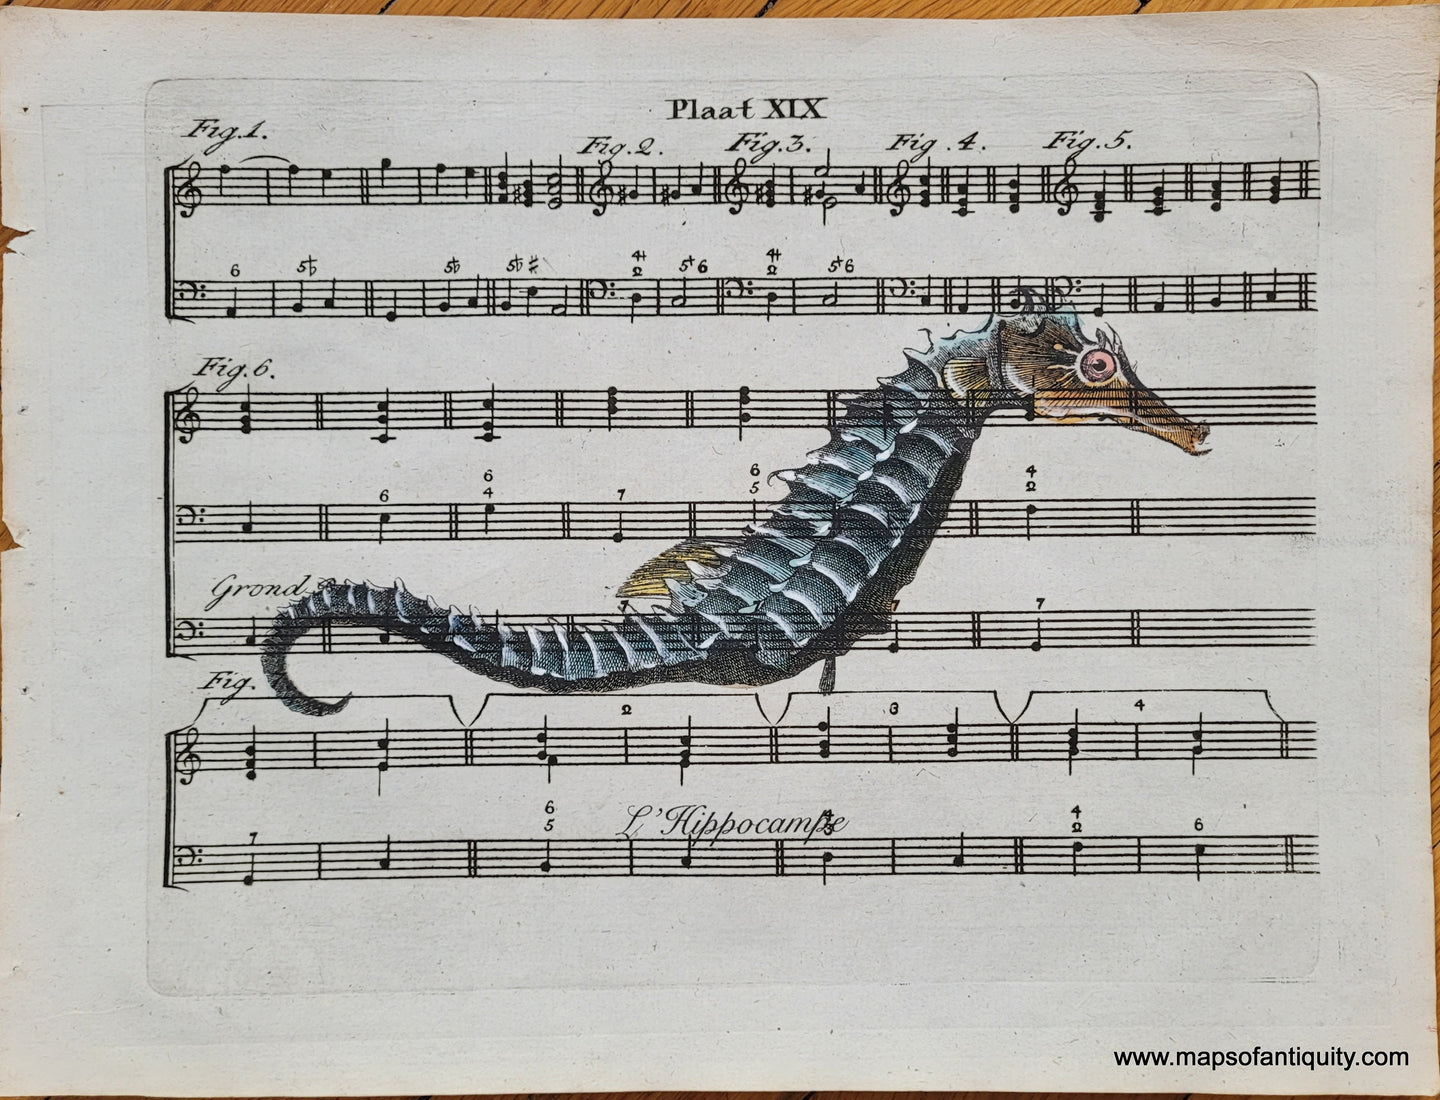 Specialty-Hand-Made-Reproduction-on-Antique-Paper-Seahorse-on-Sheet-Music--Reproduction-Maps-Of-Antiquity